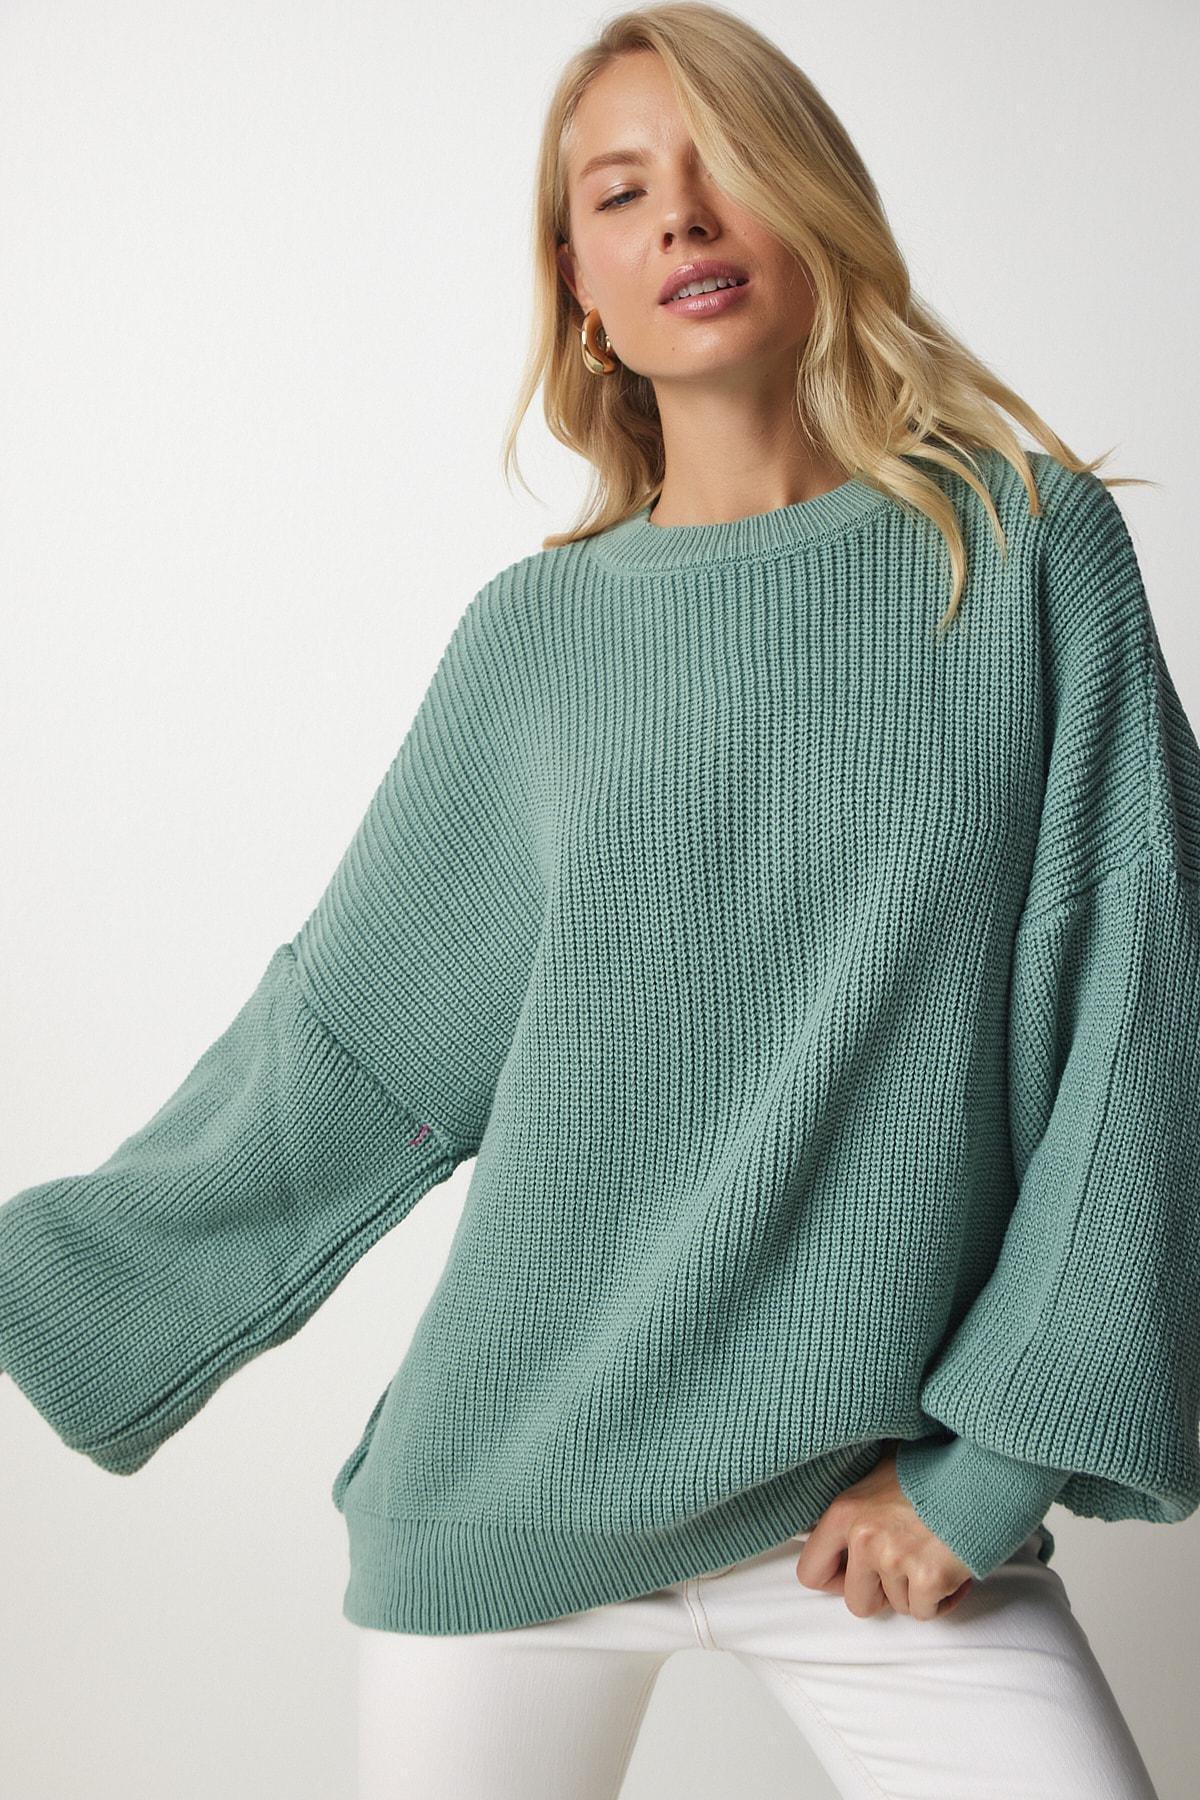 Happiness Istanbul - Turquoise Oversized Knitwear Sweater